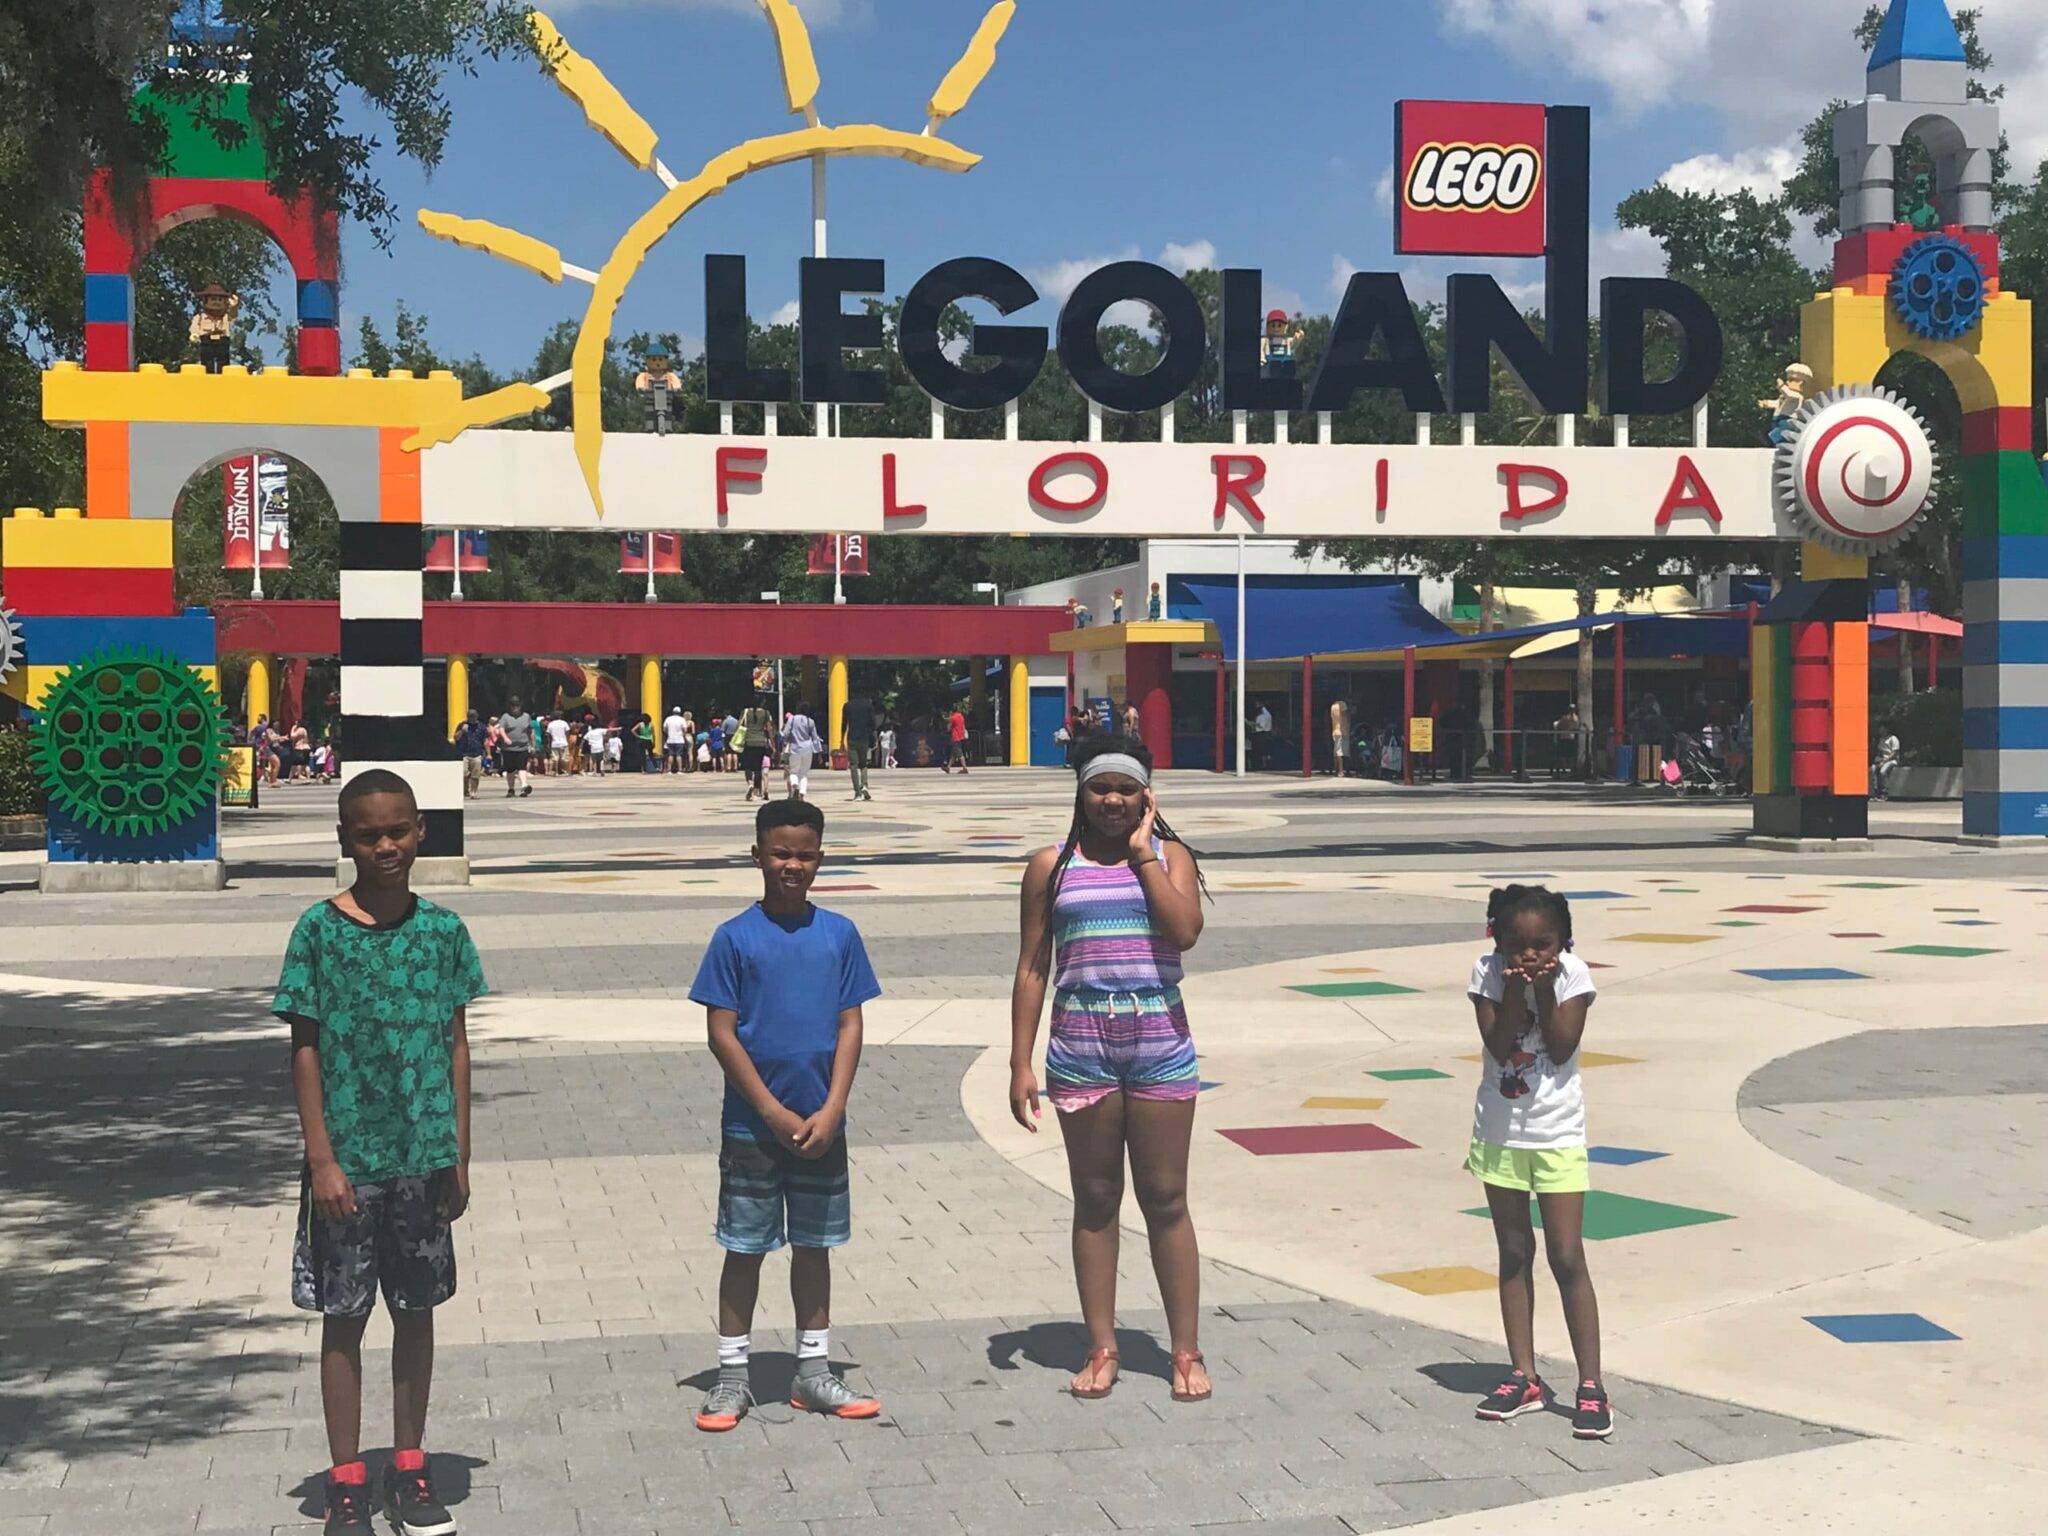 Our Visit to LEGOLand Florida during our Spring Break visit to Florida